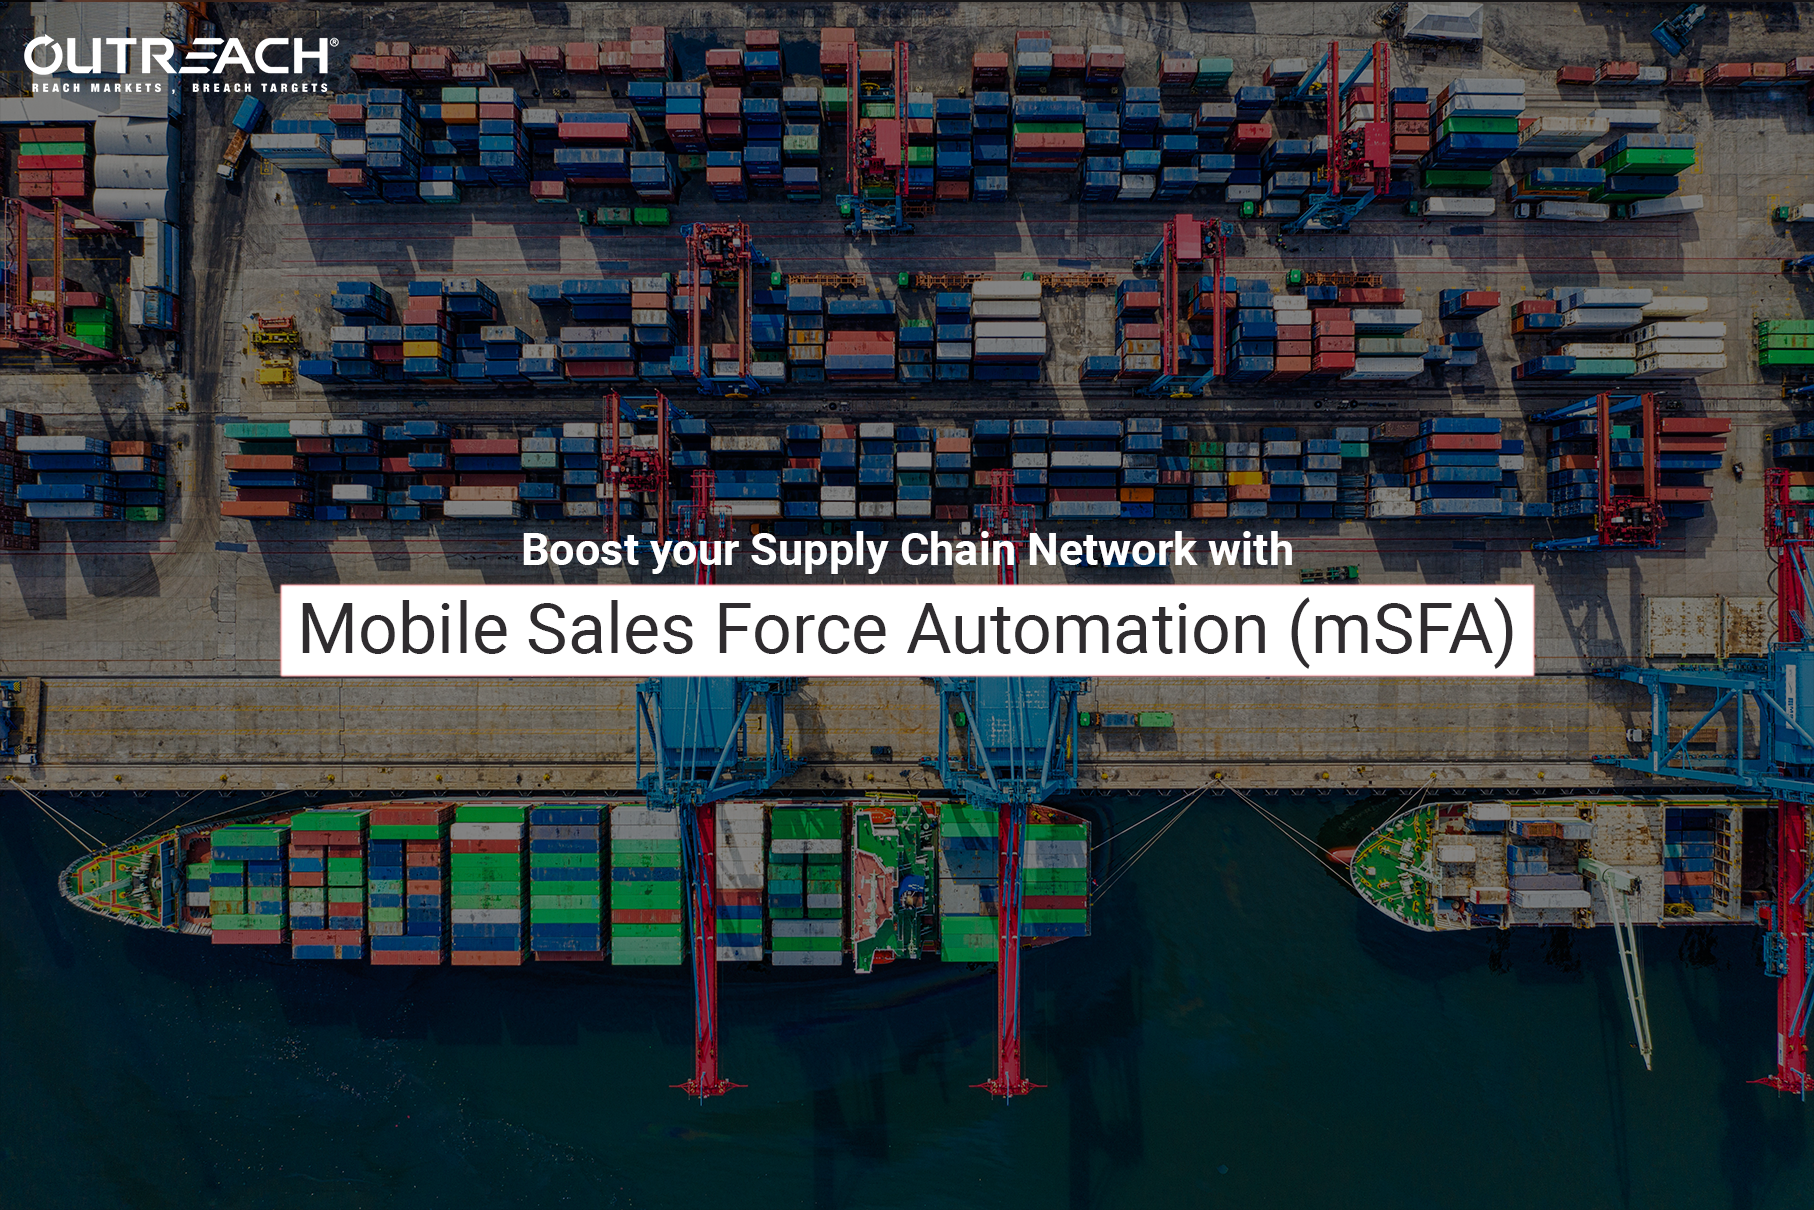 Mobile Sales Force Automation software